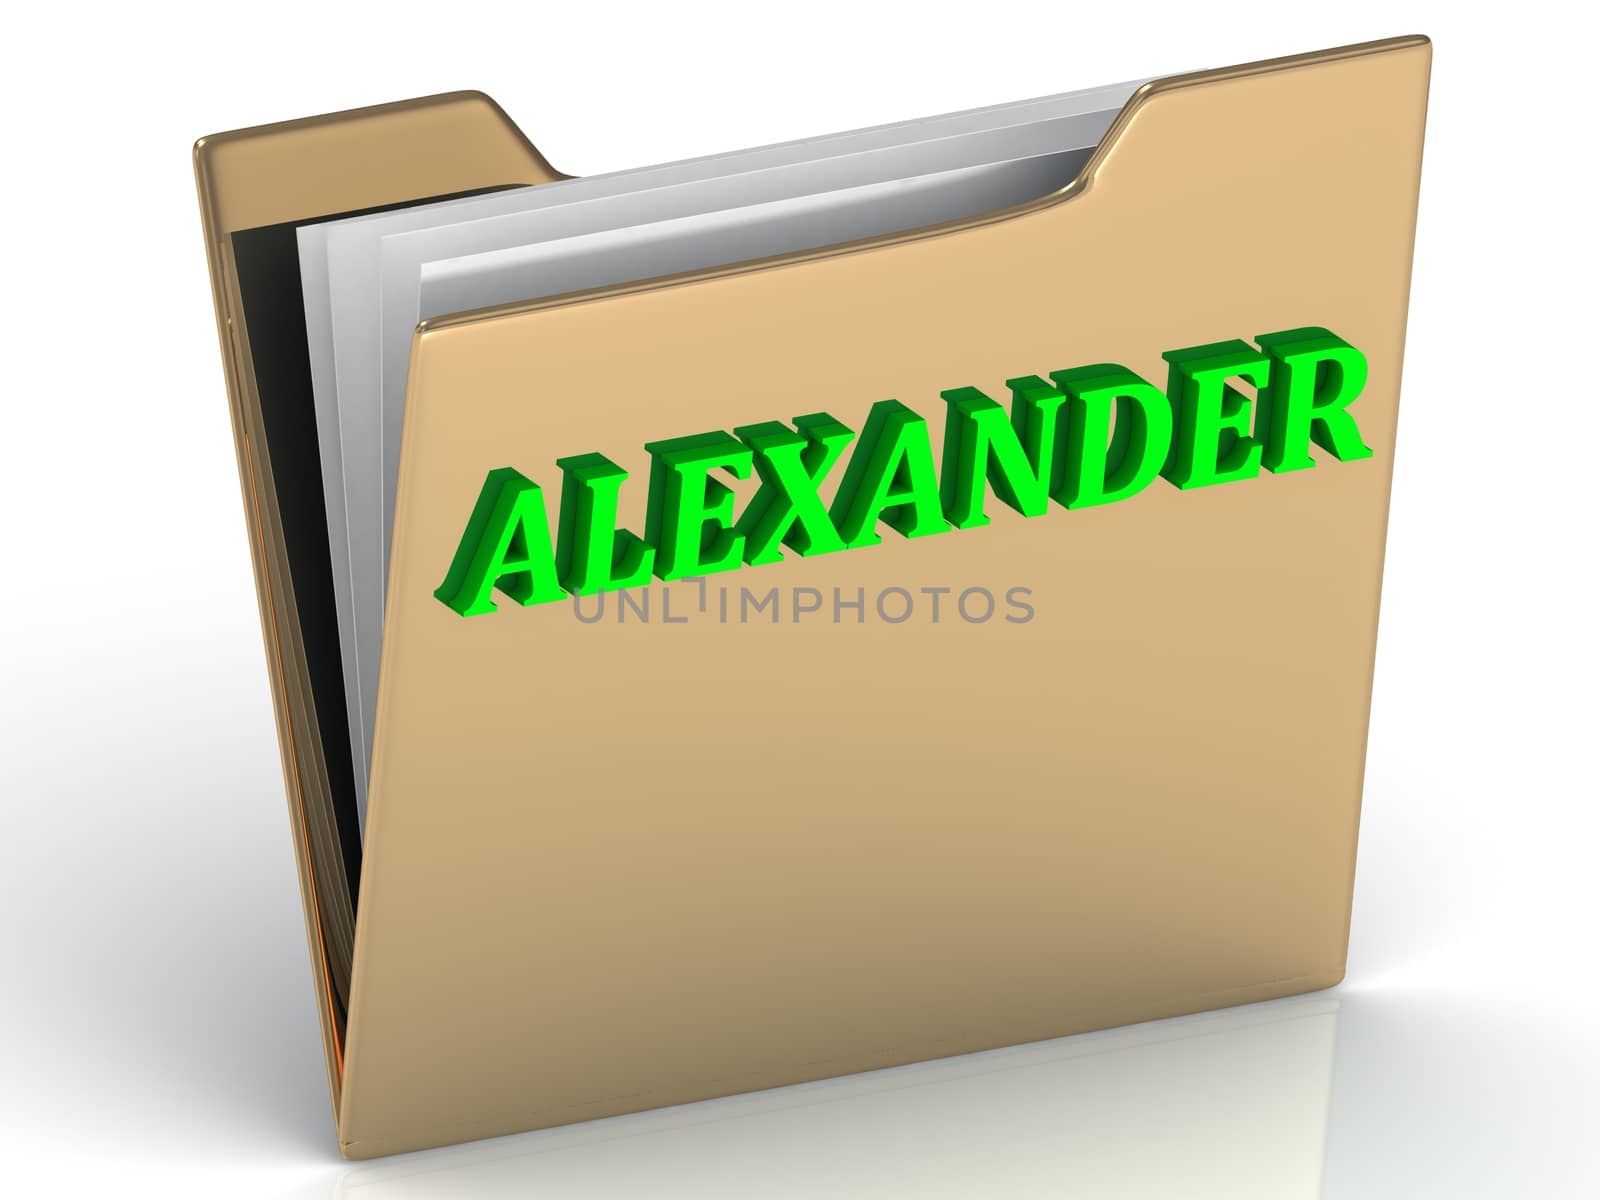 ALEXANDER- bright green letters on gold paperwork folder by GreenMost